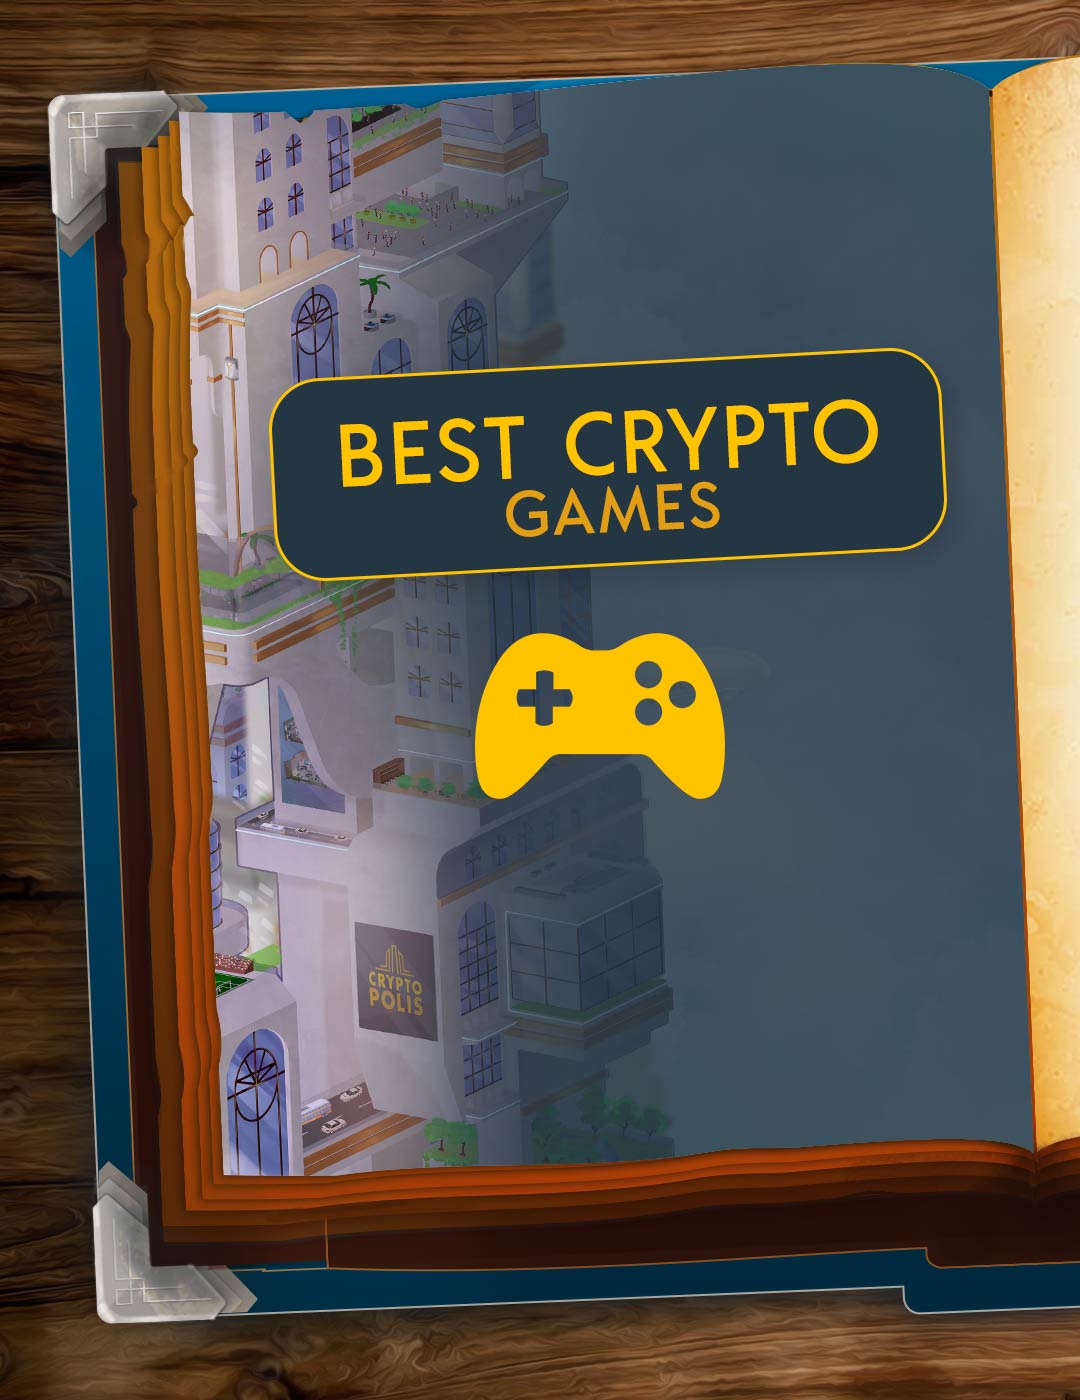 The best crypto games